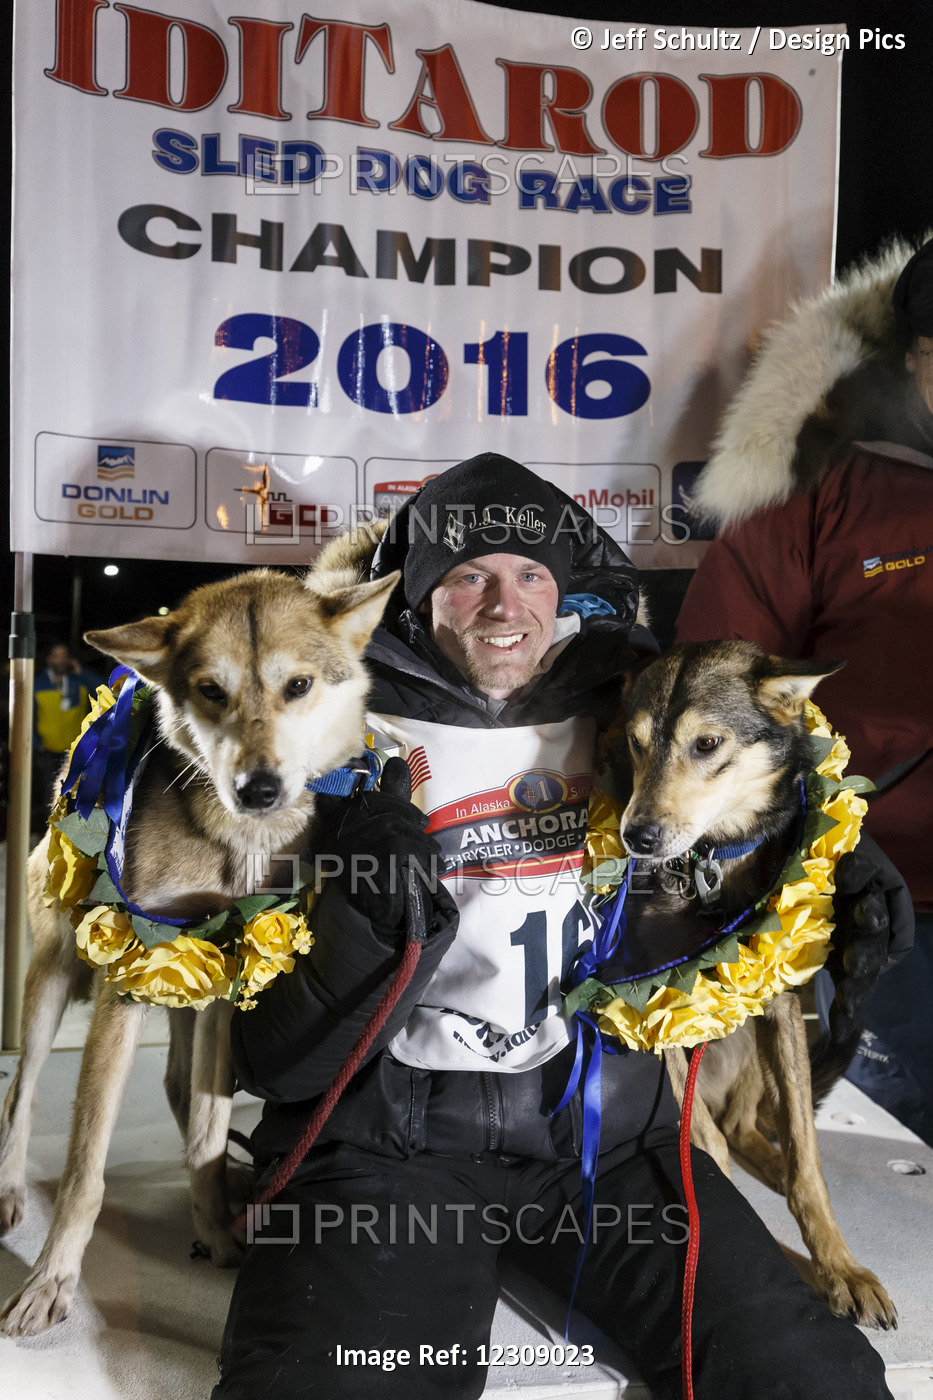 Iditarod 2016 Champion, Dallas Seavey, Poses With His Lead Dogs At The Finish ...